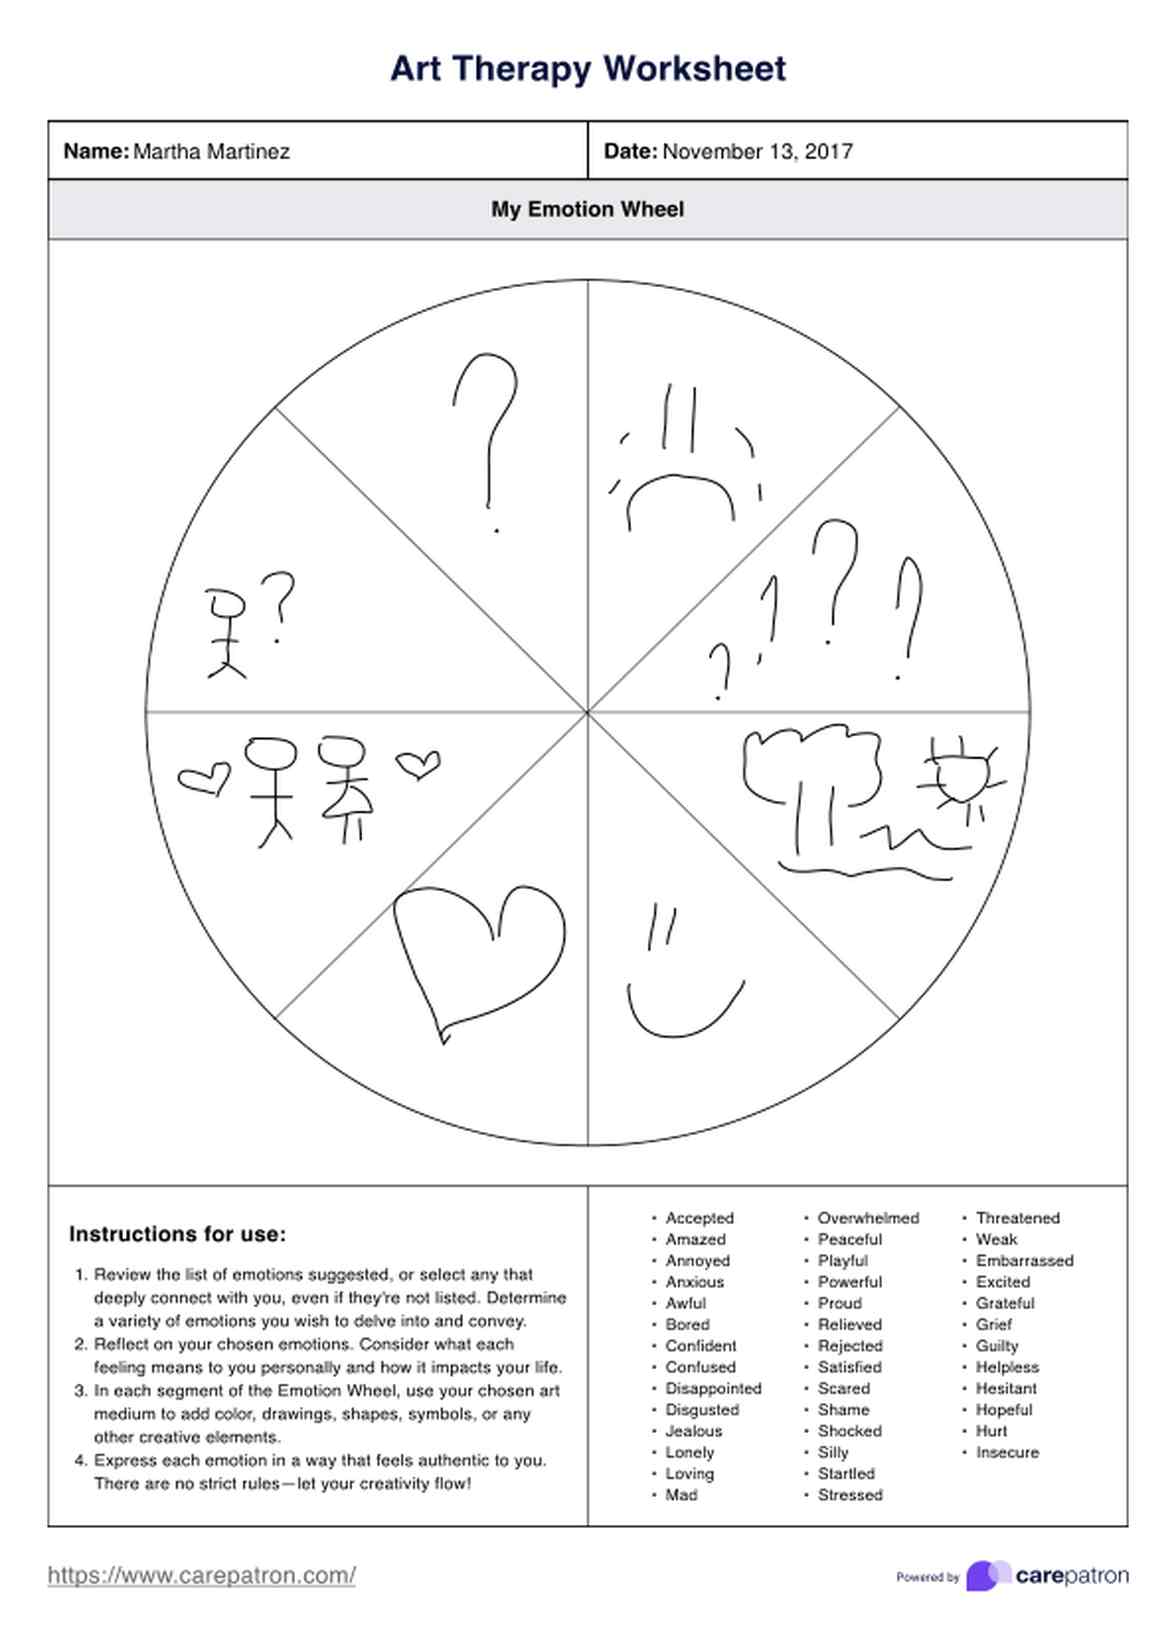 Art Therapy Worksheets PDF Example